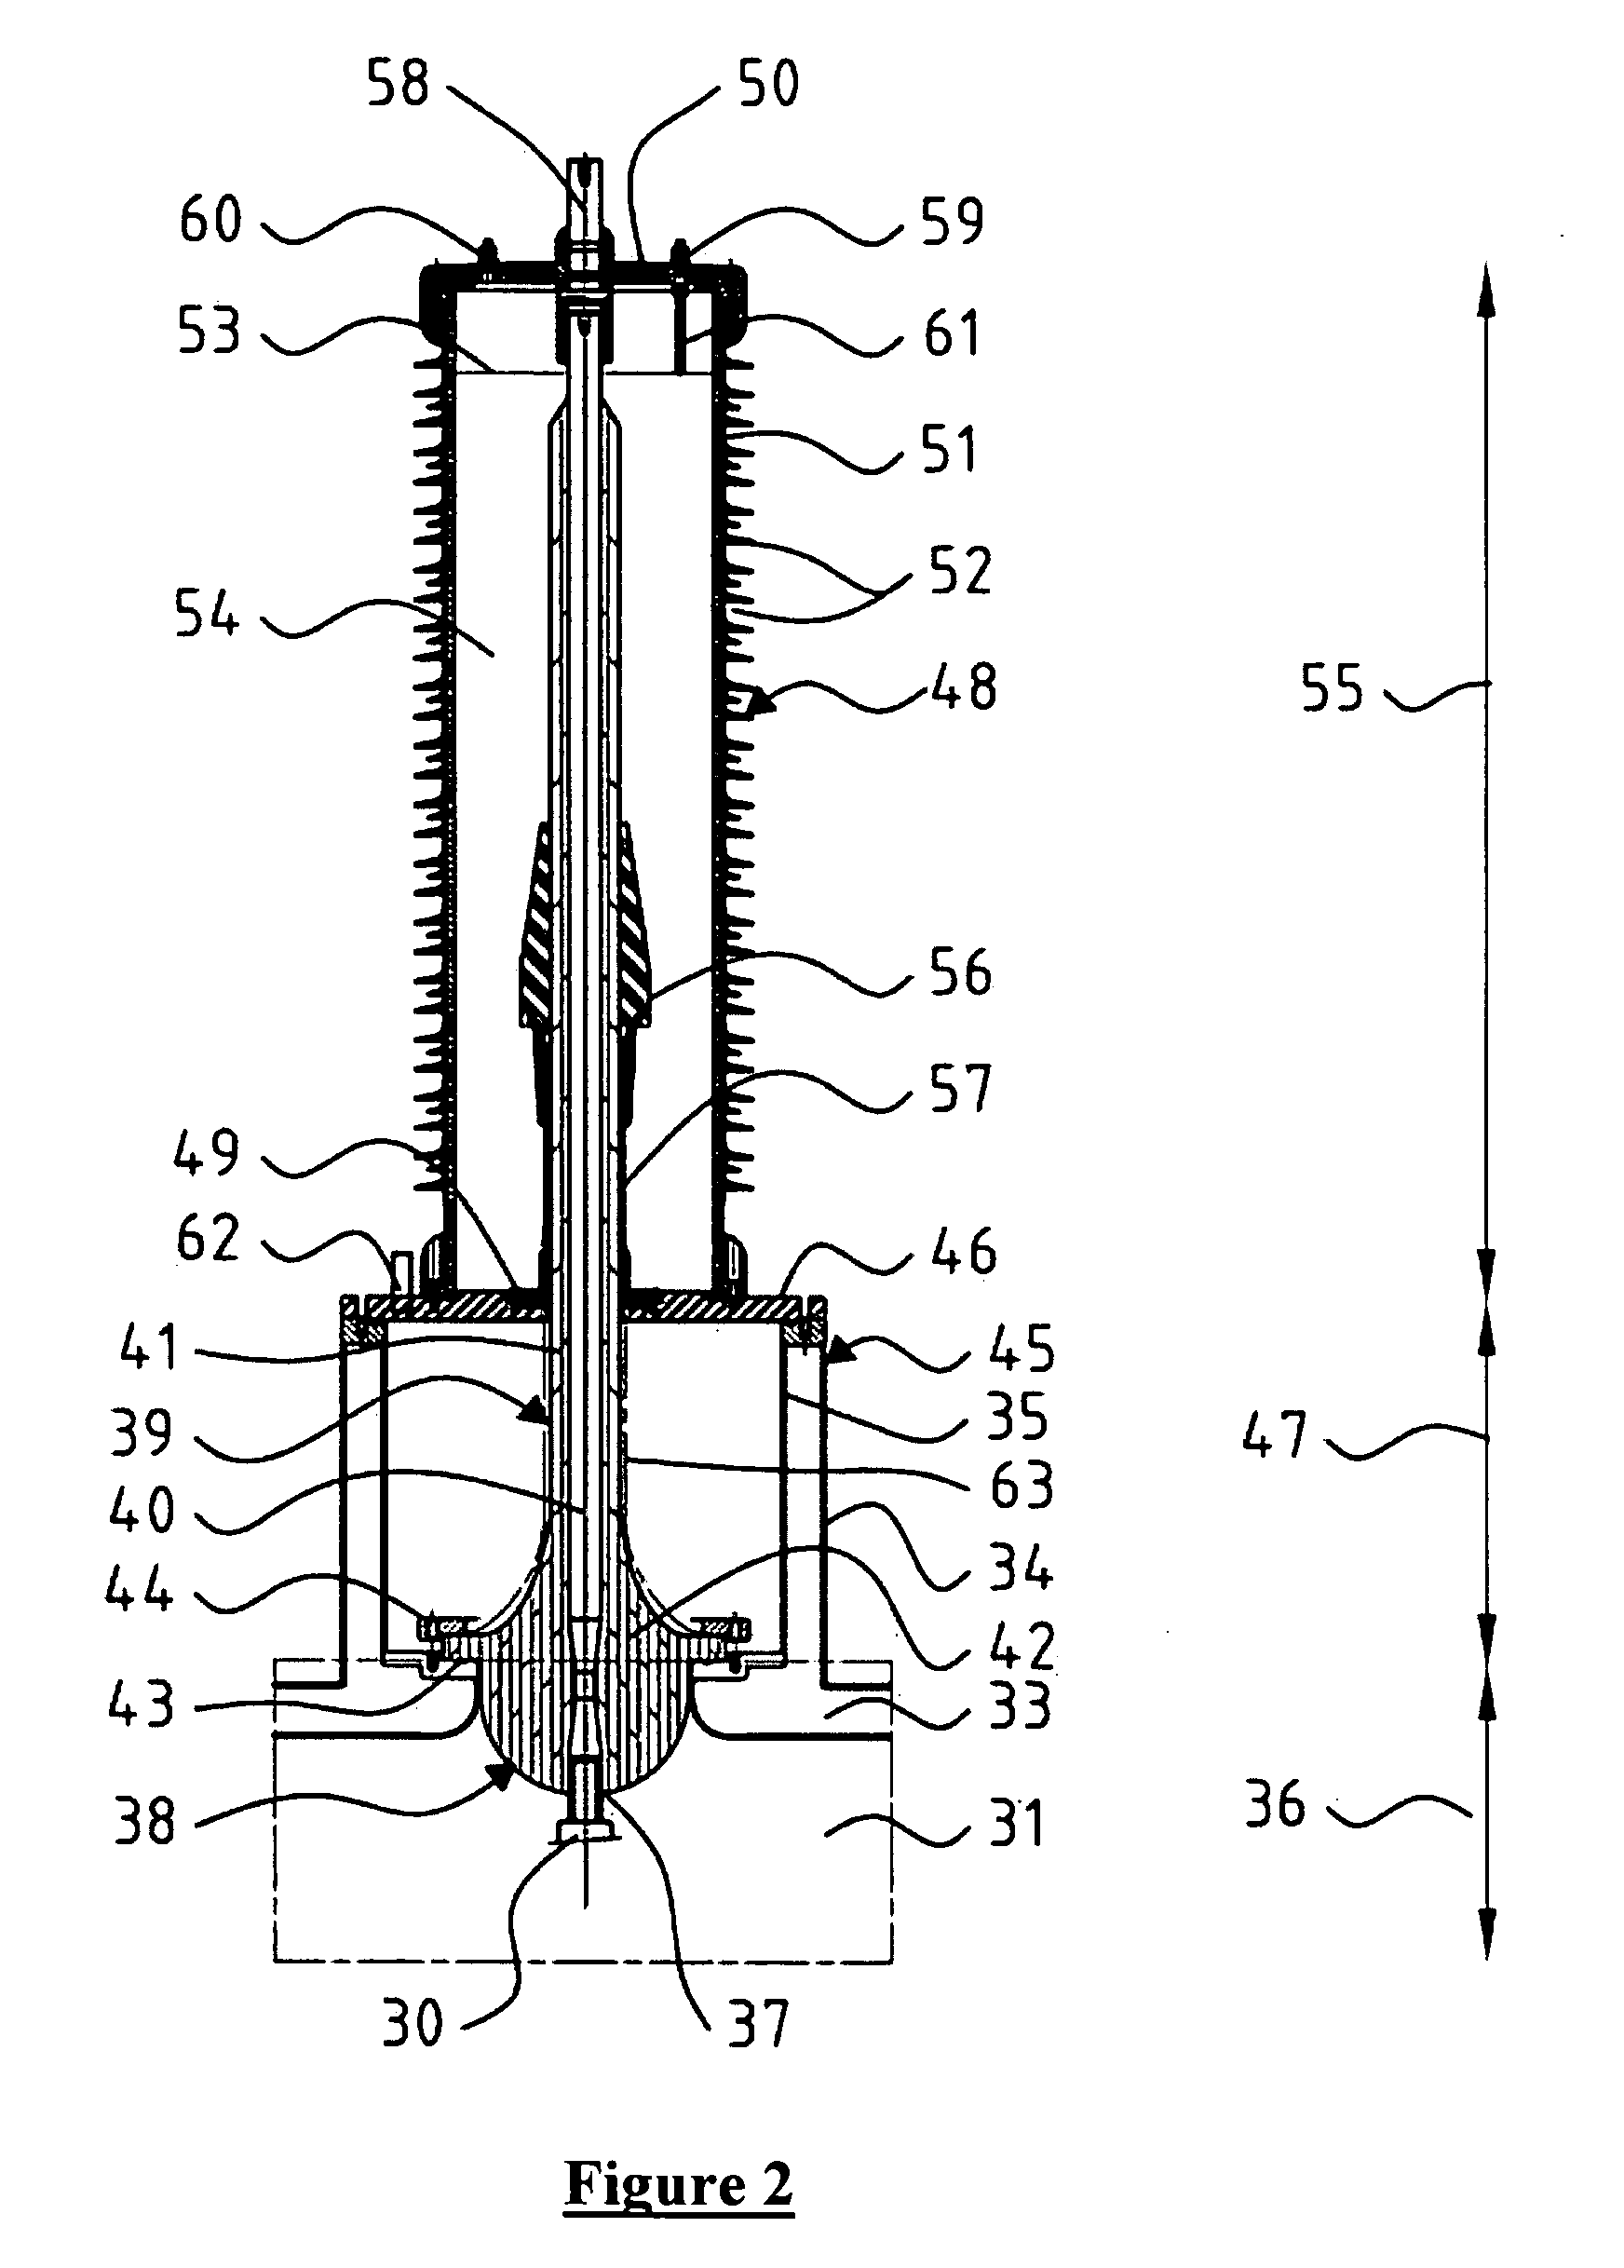 Electrical bushing for a superconductor element